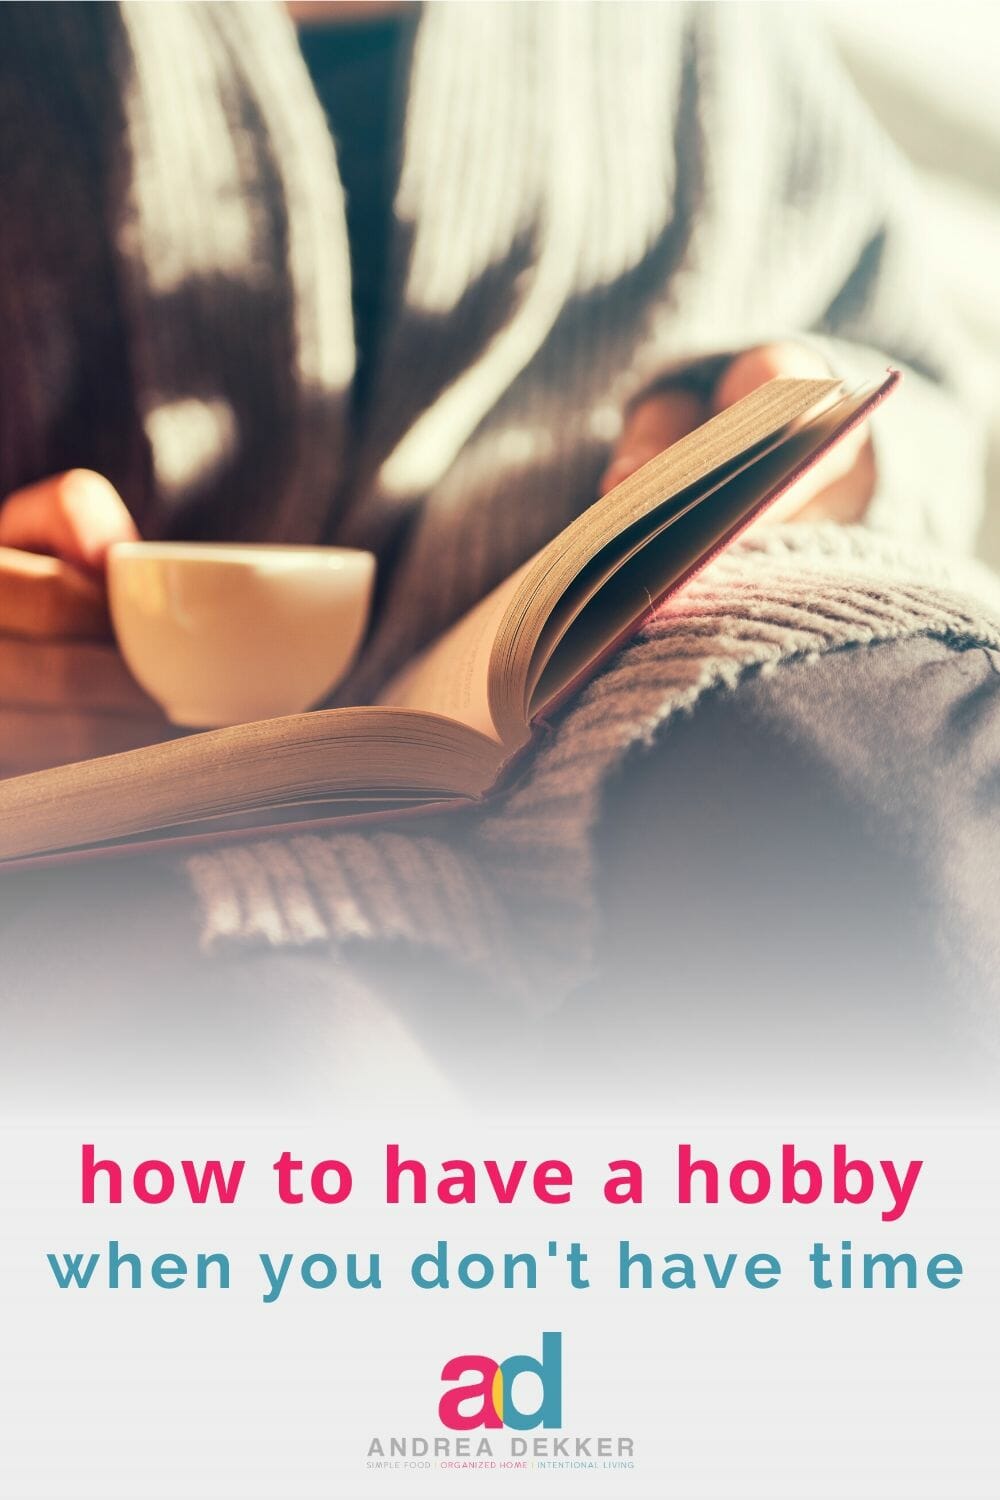 Learn 6 practical tips and get real-life motivation to make time for your hobbies and passions every day... even if you think you don't have the time! via @andreadekker